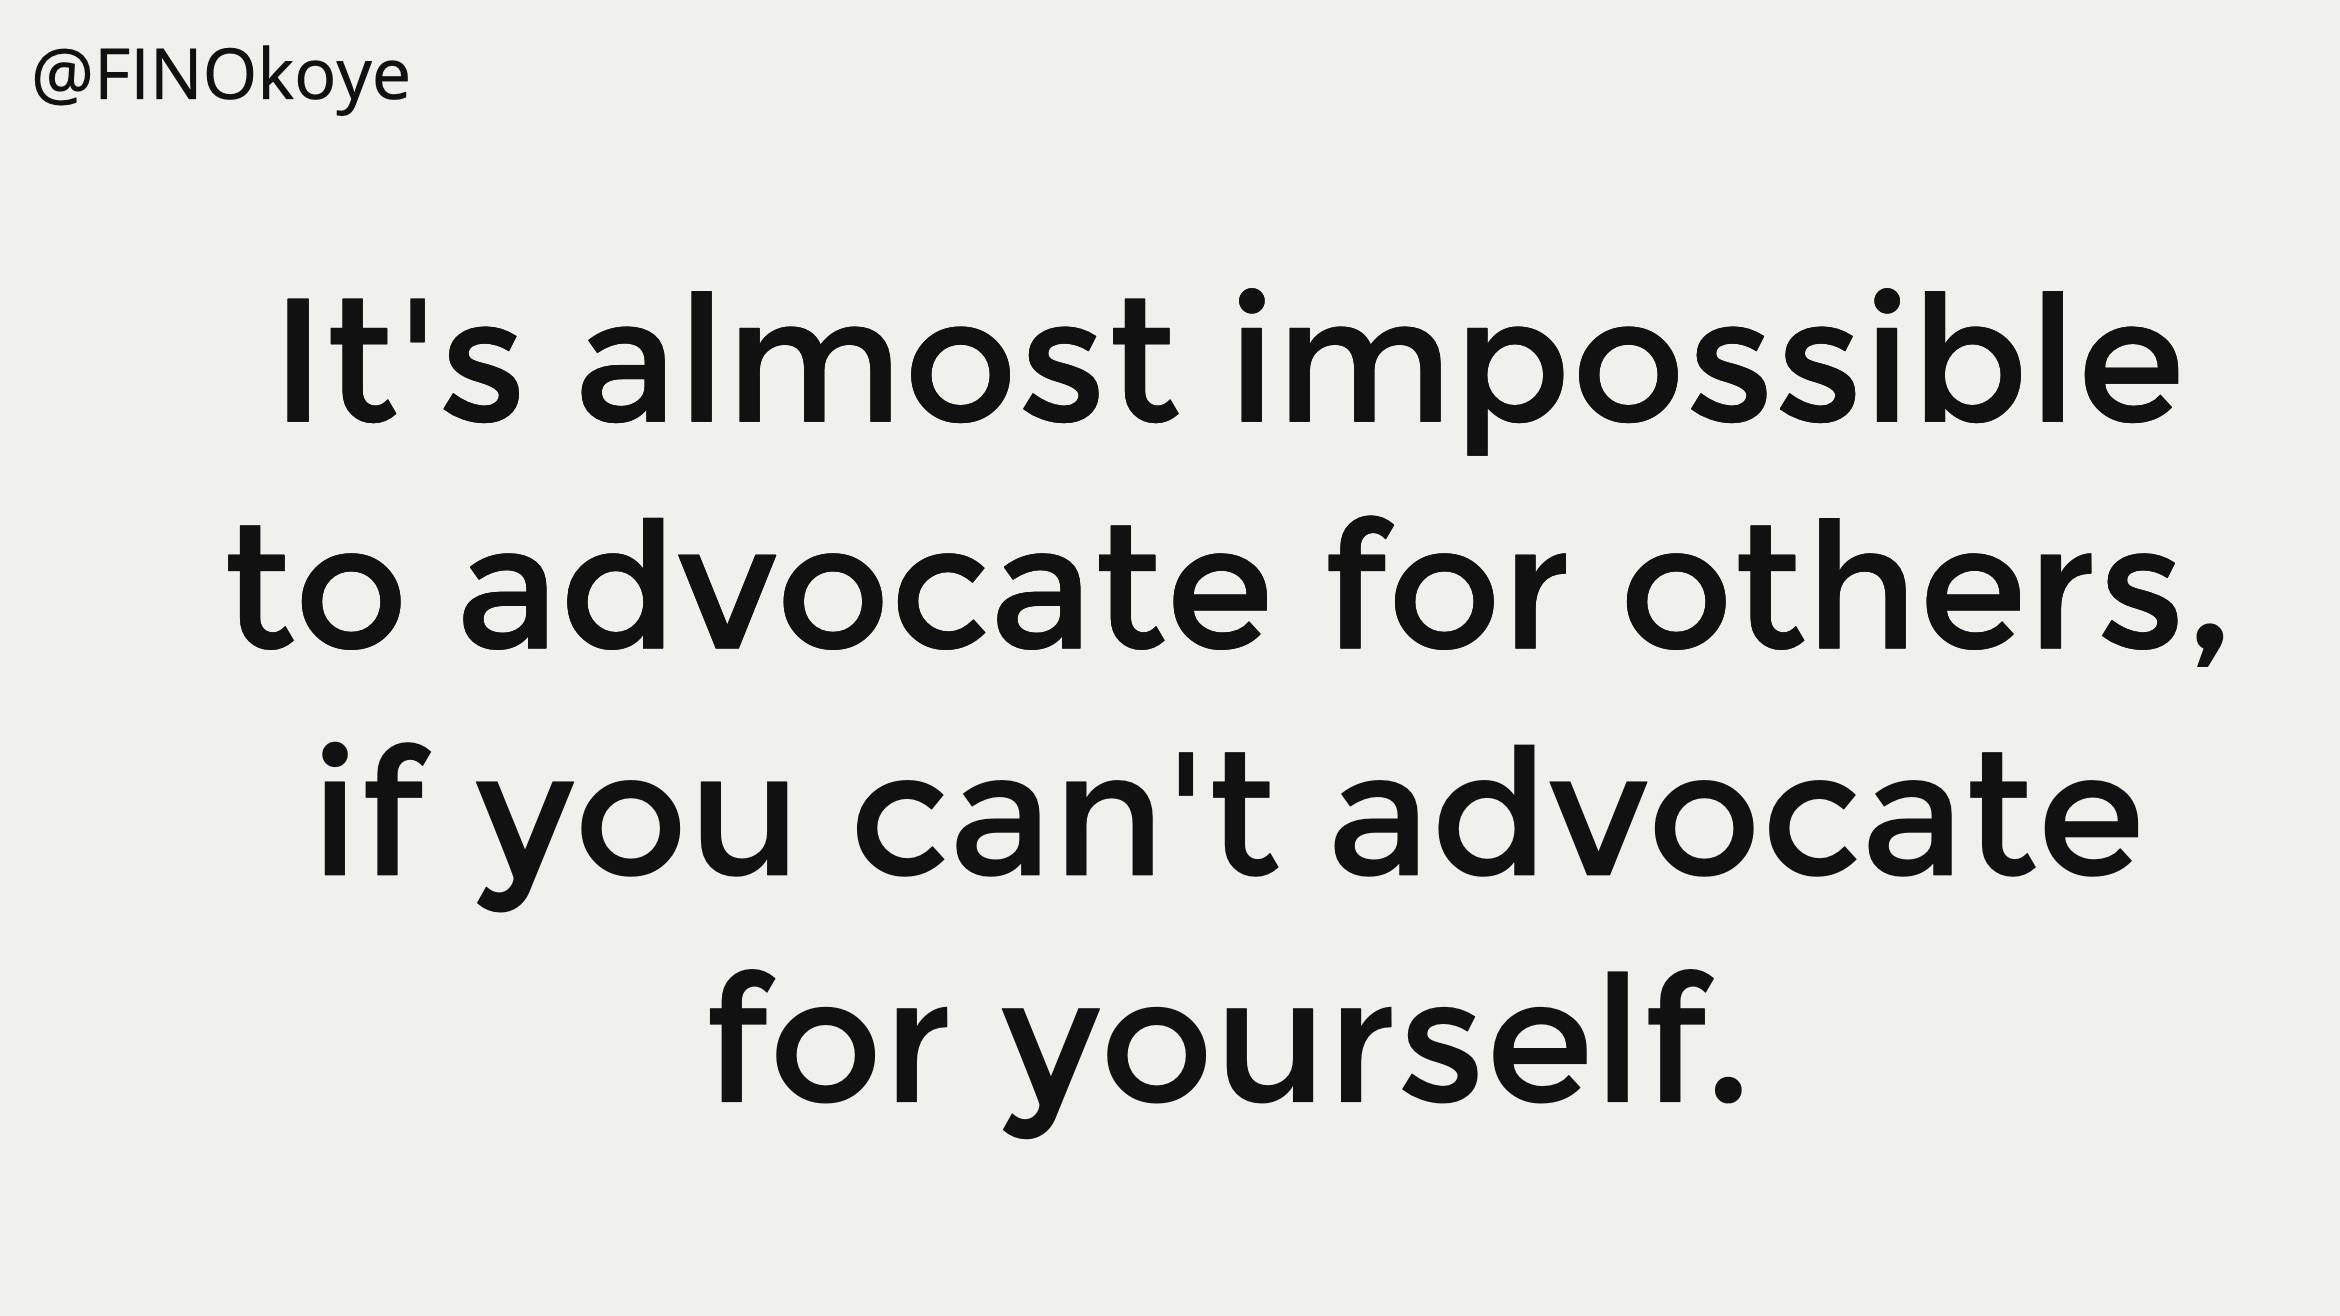 It's almost impossible to advocate for others, if you can't advocate for yourself